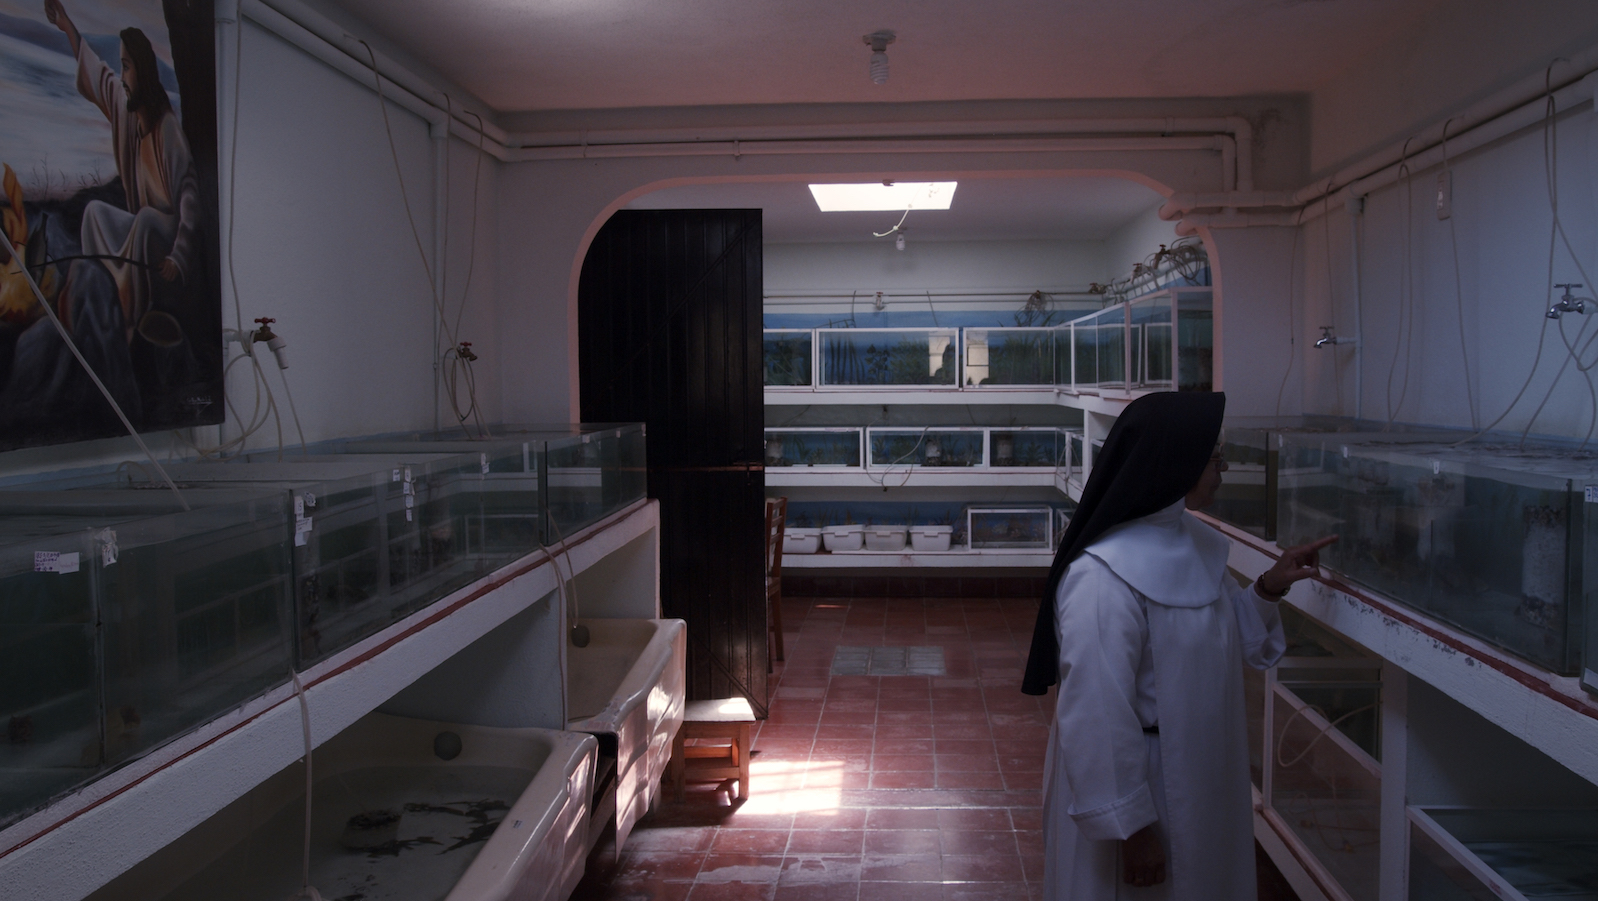 A nun stands in an empty medical facility looking at salamander cages